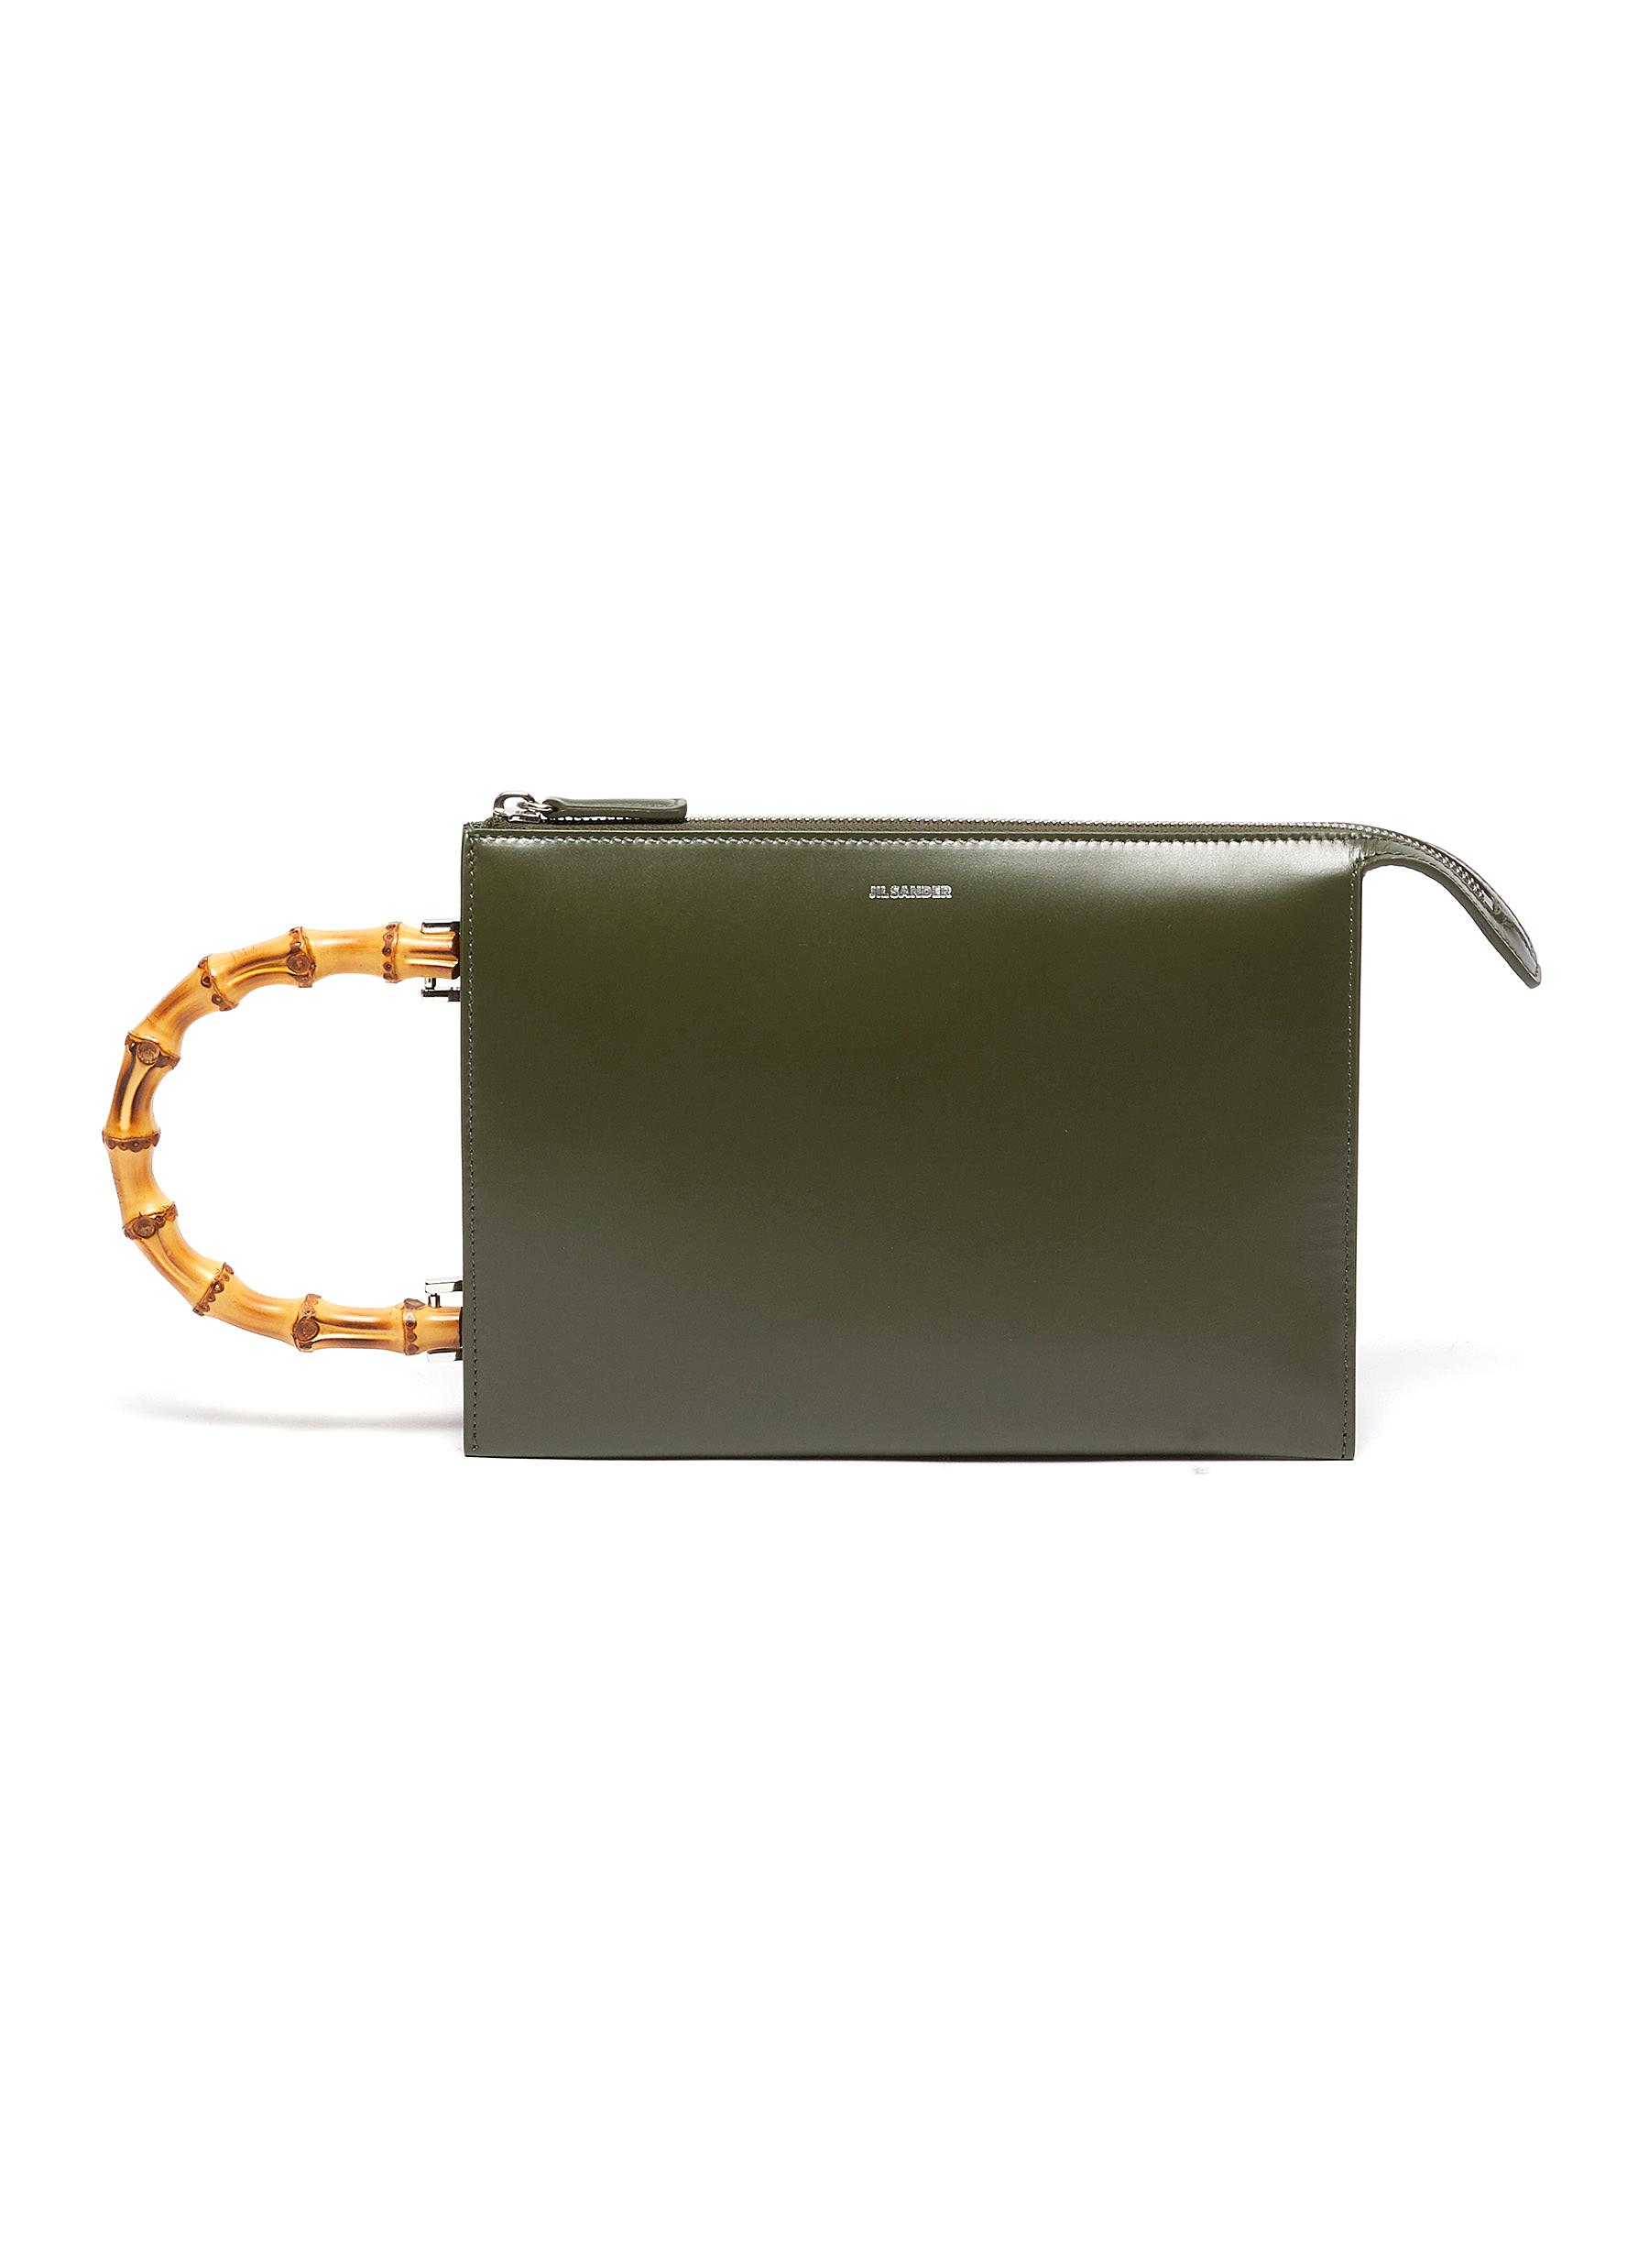 Jil Sander 'tootie Bamboo' Small Leather Clutch In Dark Green | ModeSens